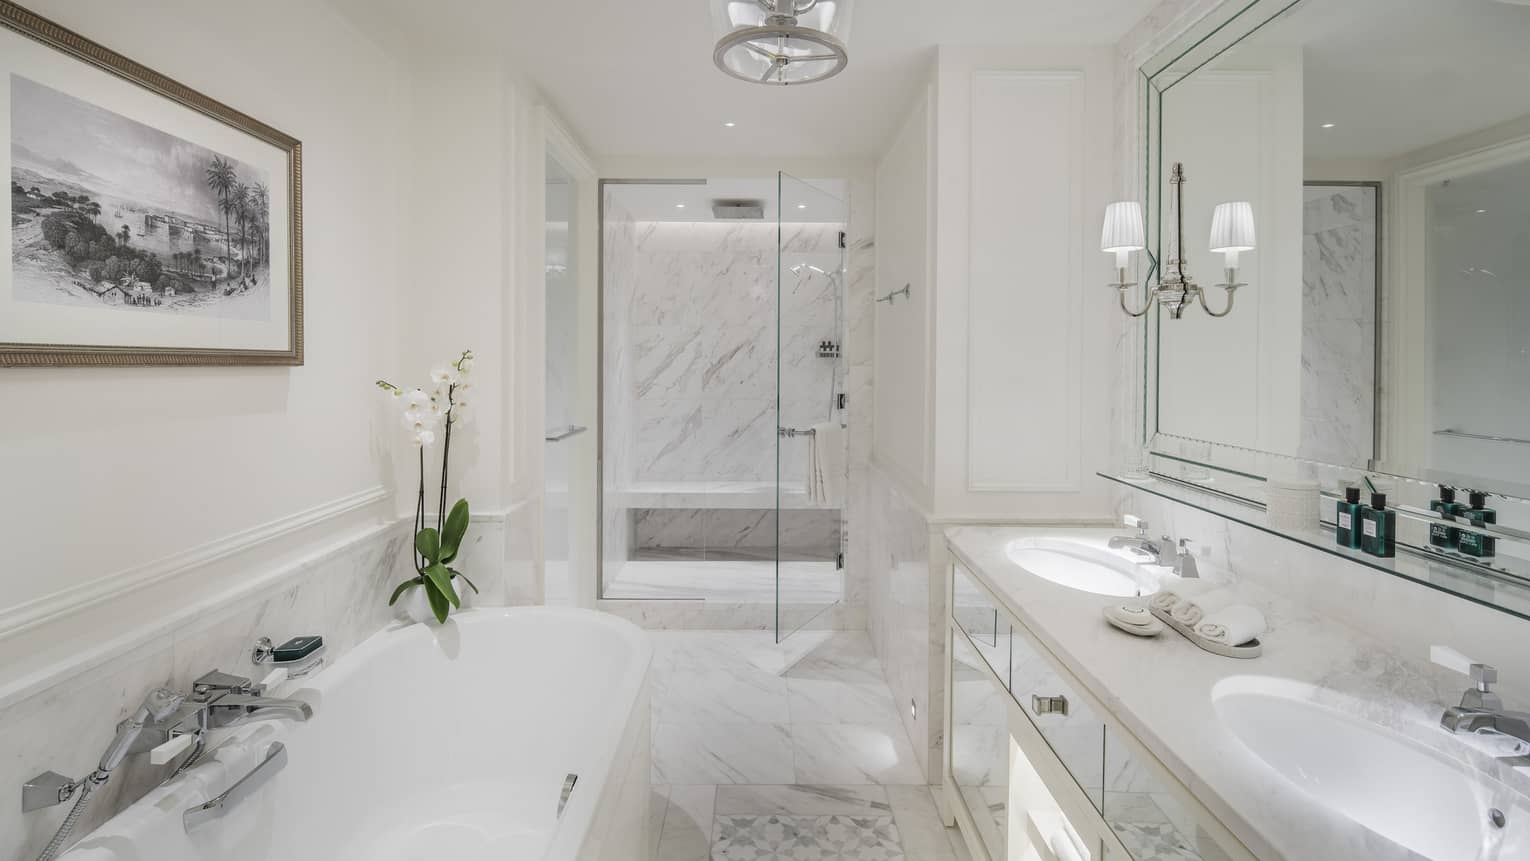 A marble bathroom with a large tub separate from a glass-walled shower.